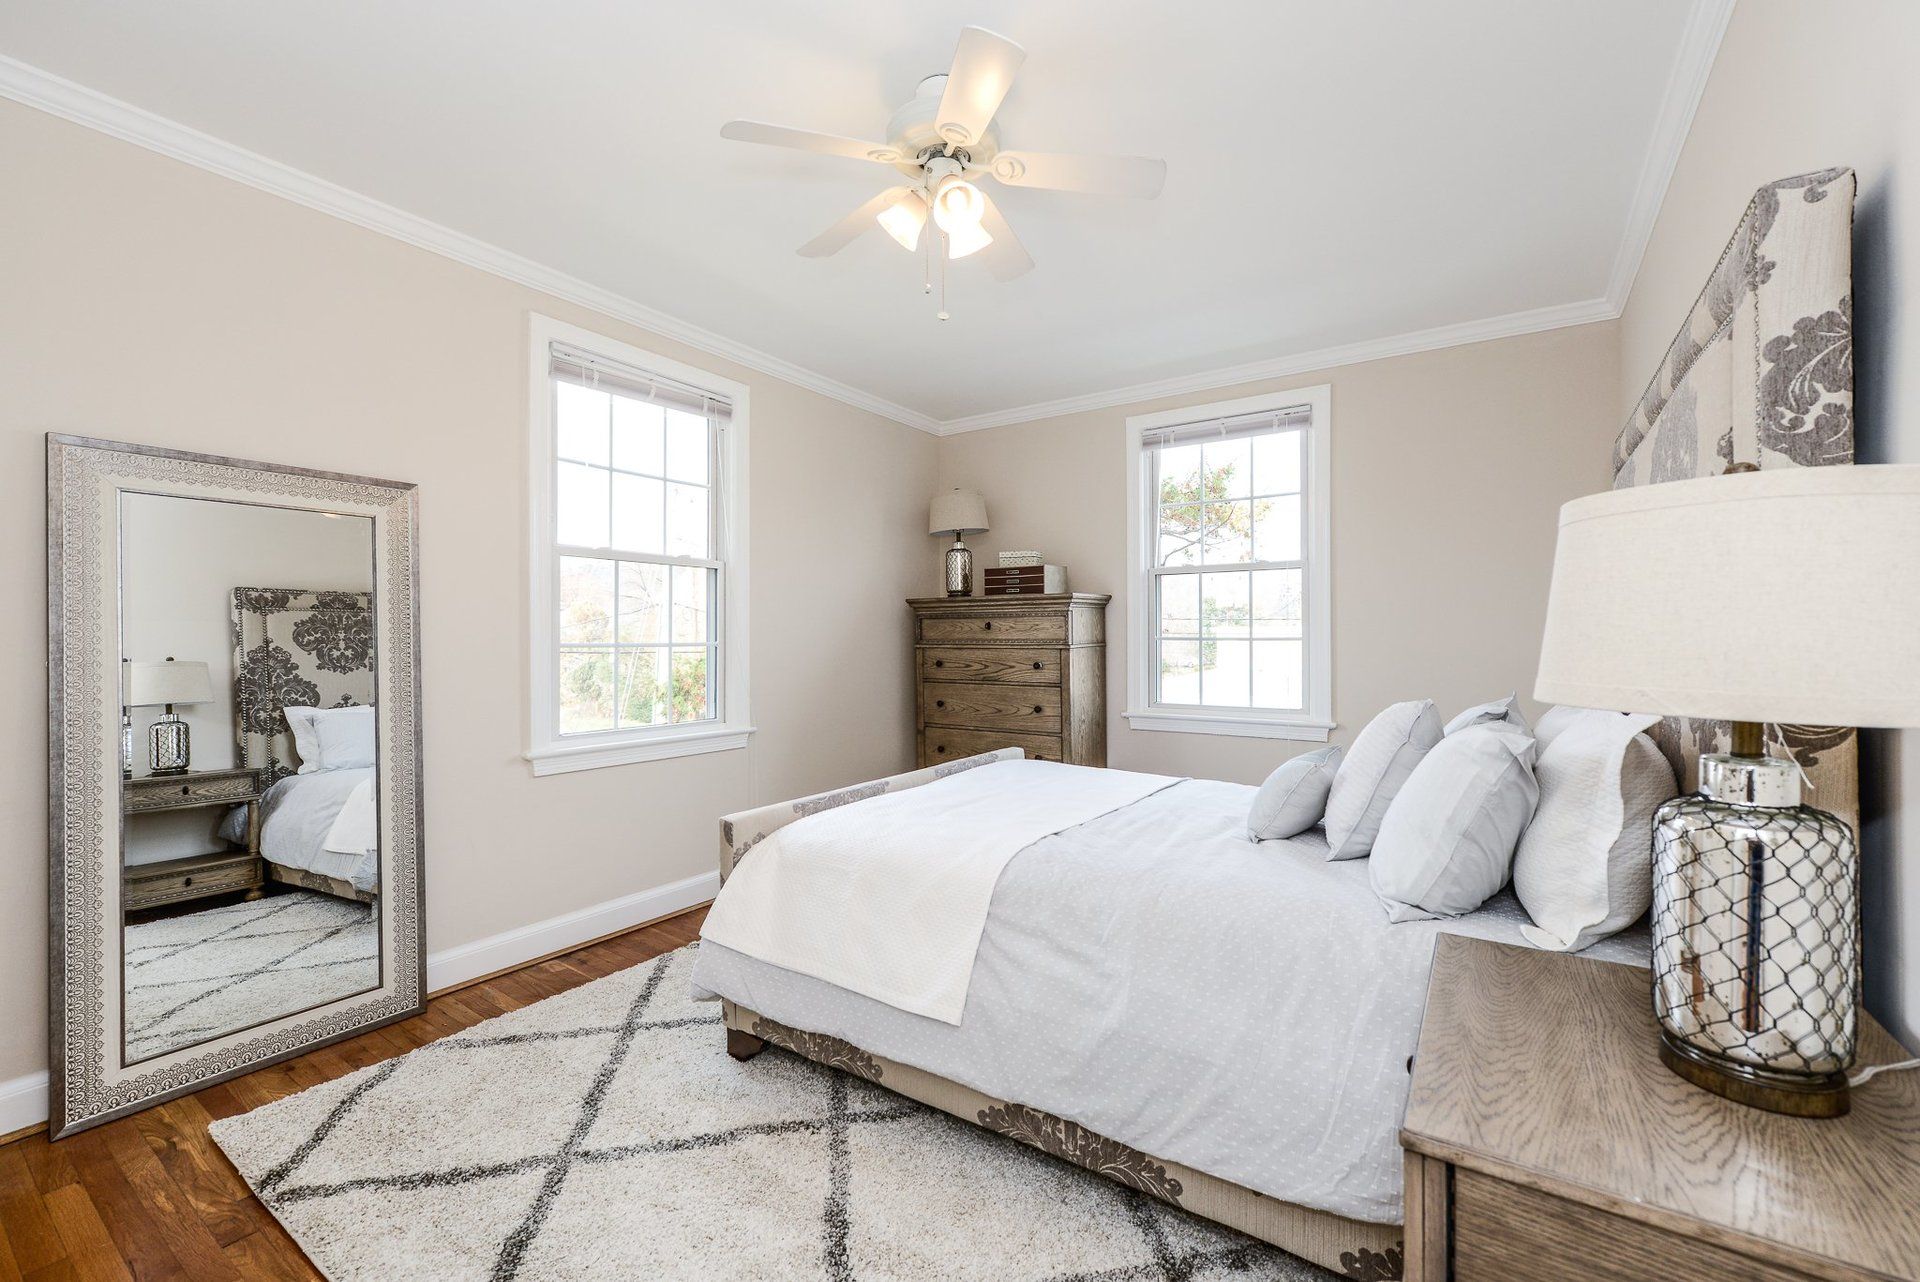 Bodacious Bedroom with Windows that brighten your day!